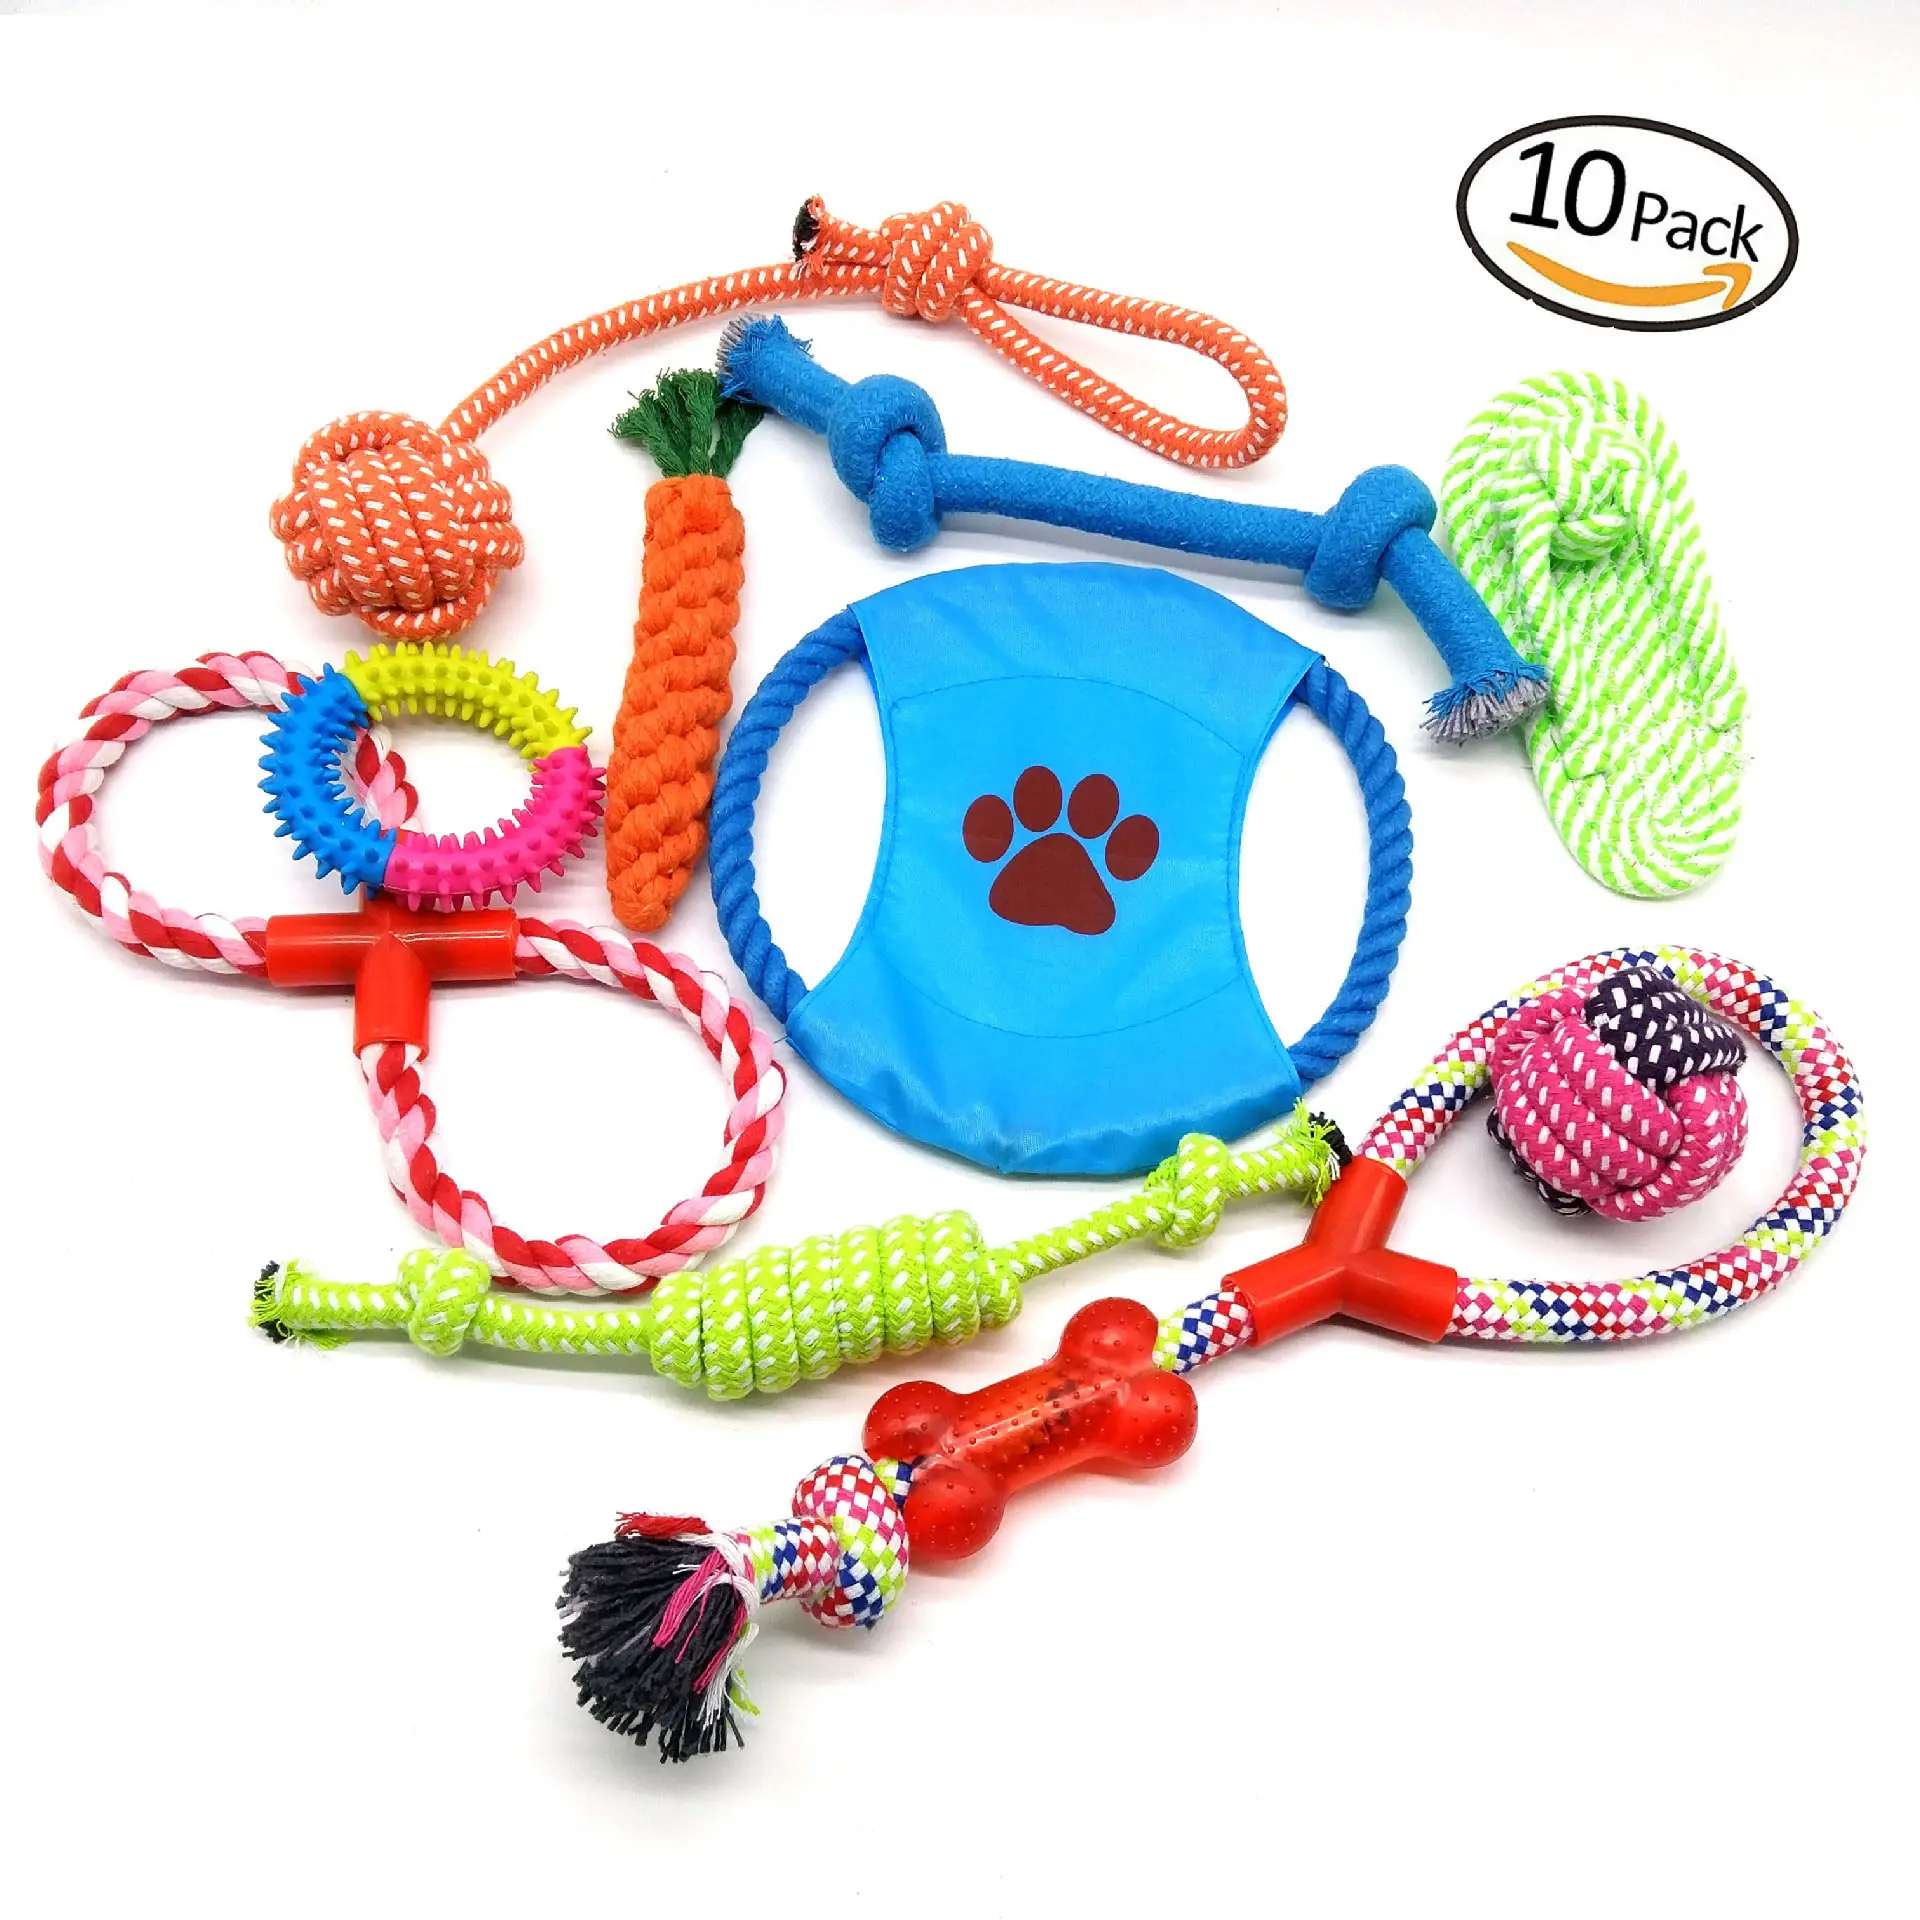 Amazon best selling pet toy kit 10 pack most popular dog toys for small dogs & puppies